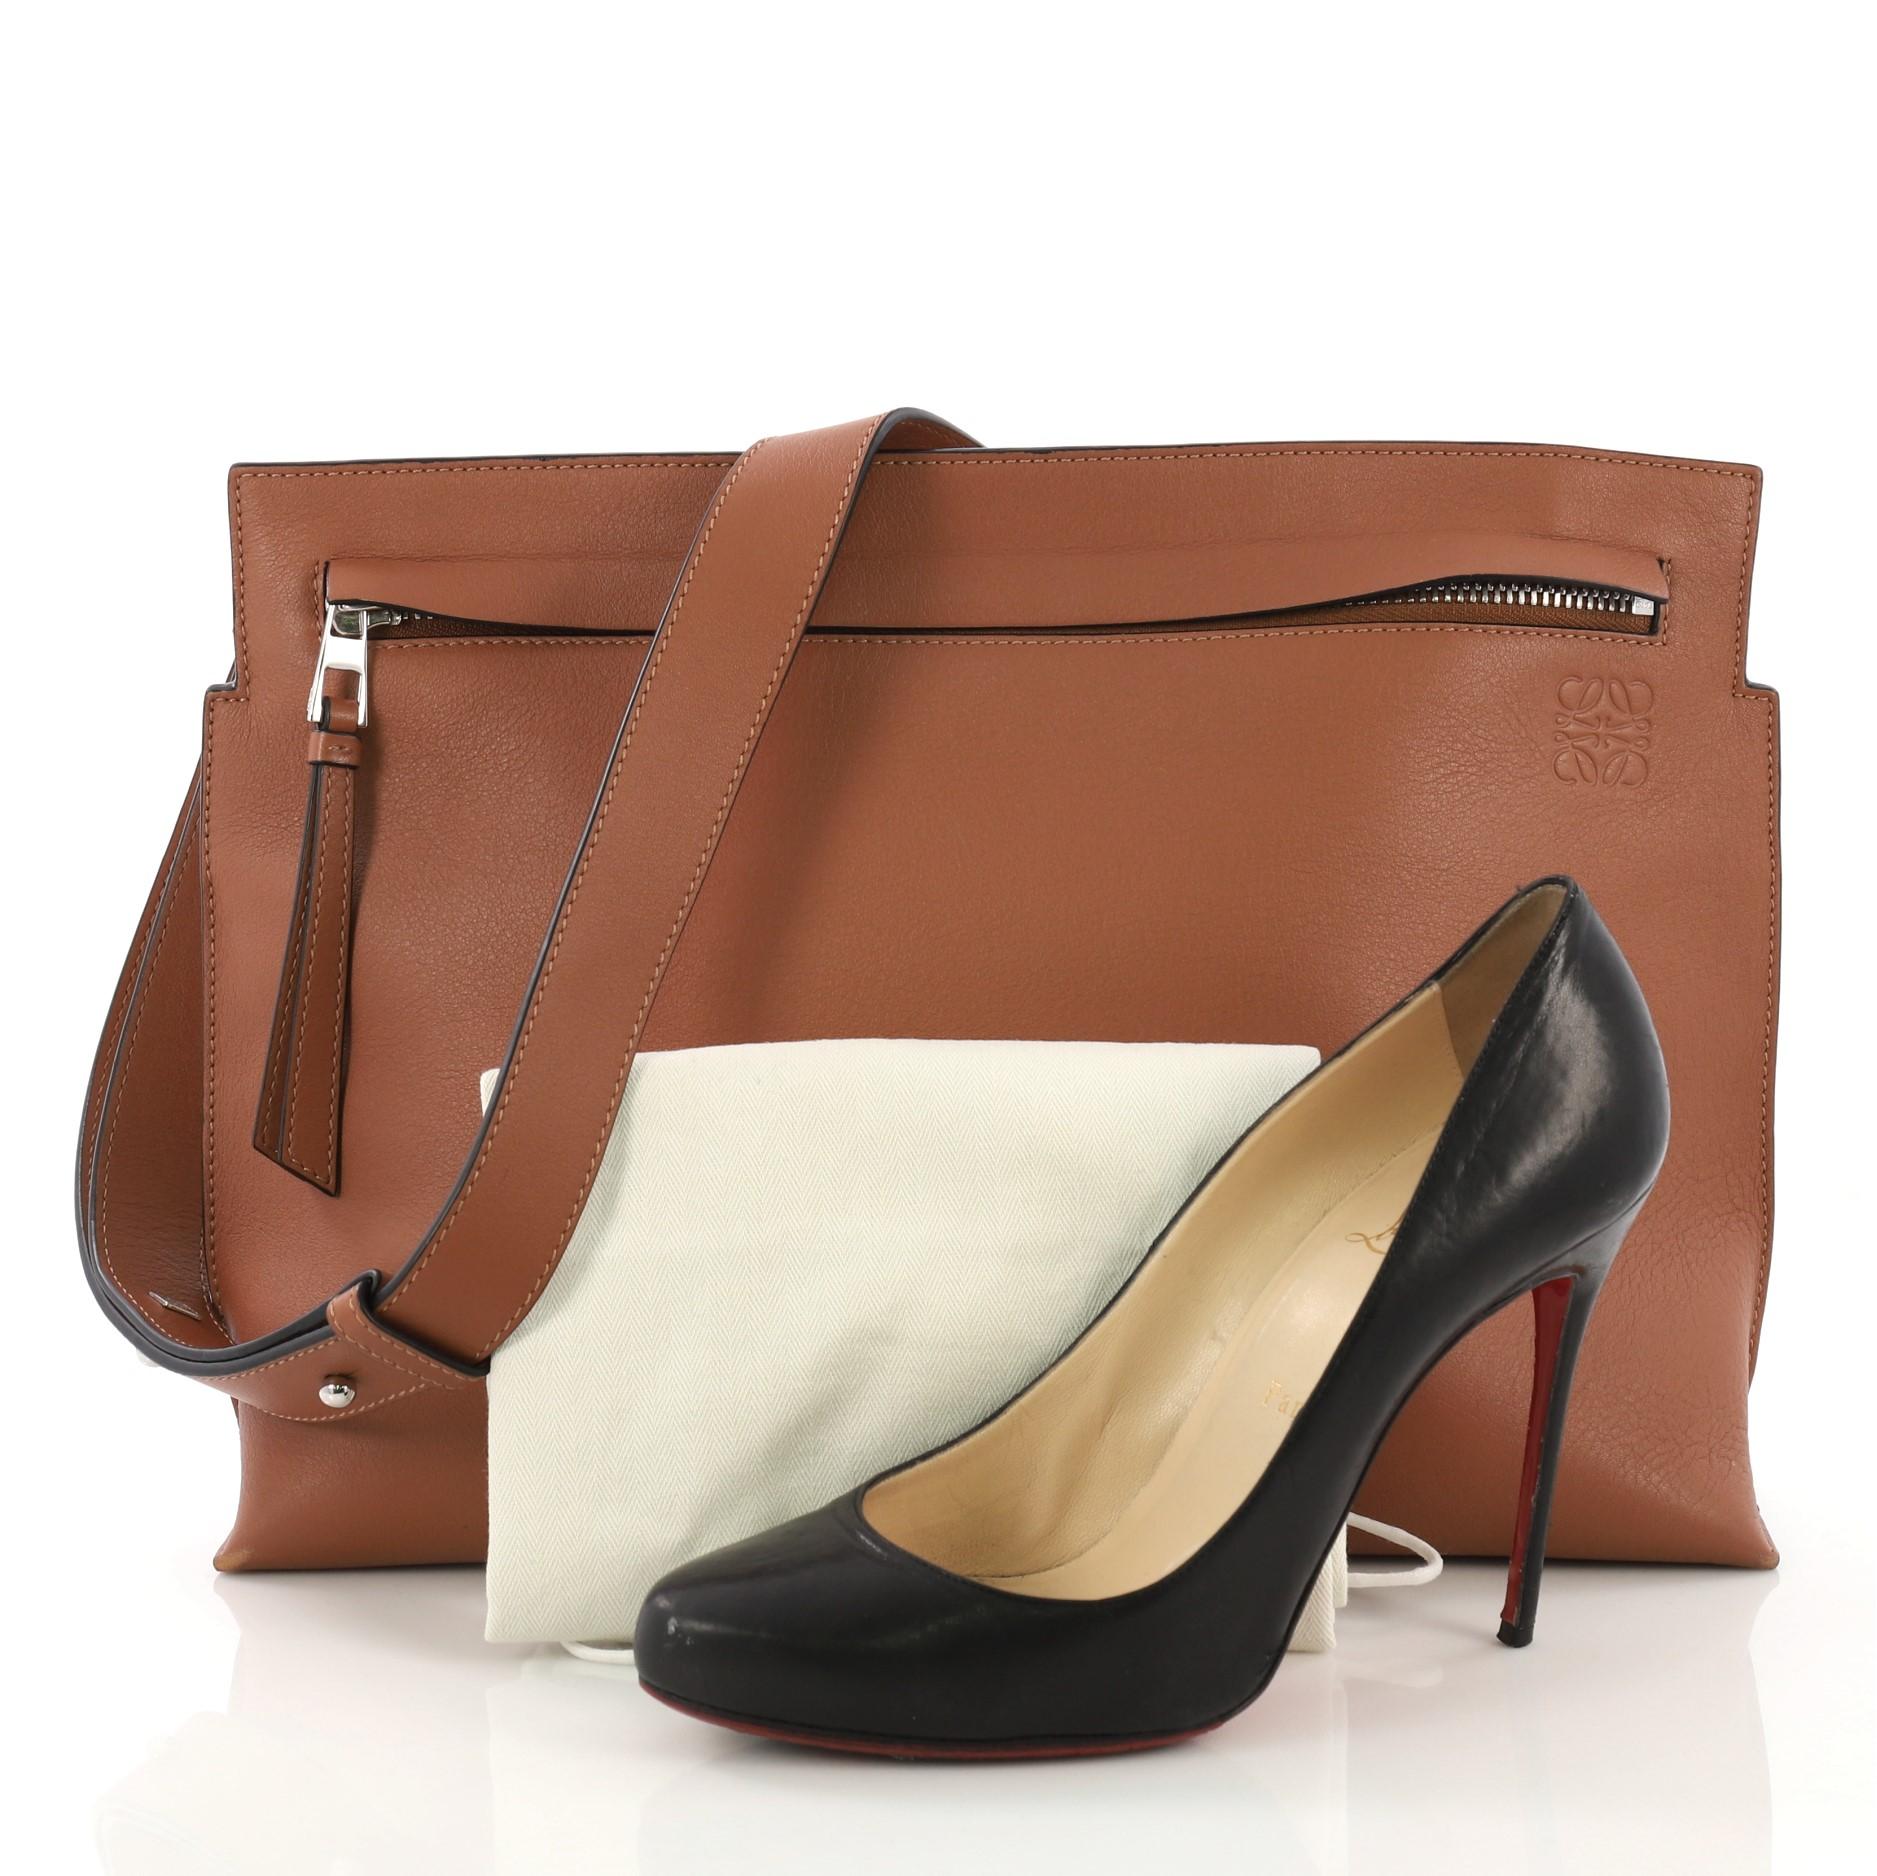 This Loewe T Messenger Leather Large, crafted in brown leather, features an adjustable shoulder strap, debossed designer anagram and silver-tone hardware. Its zip closure opens to a black fabric interior. **Note: Shoe photographed is used as a